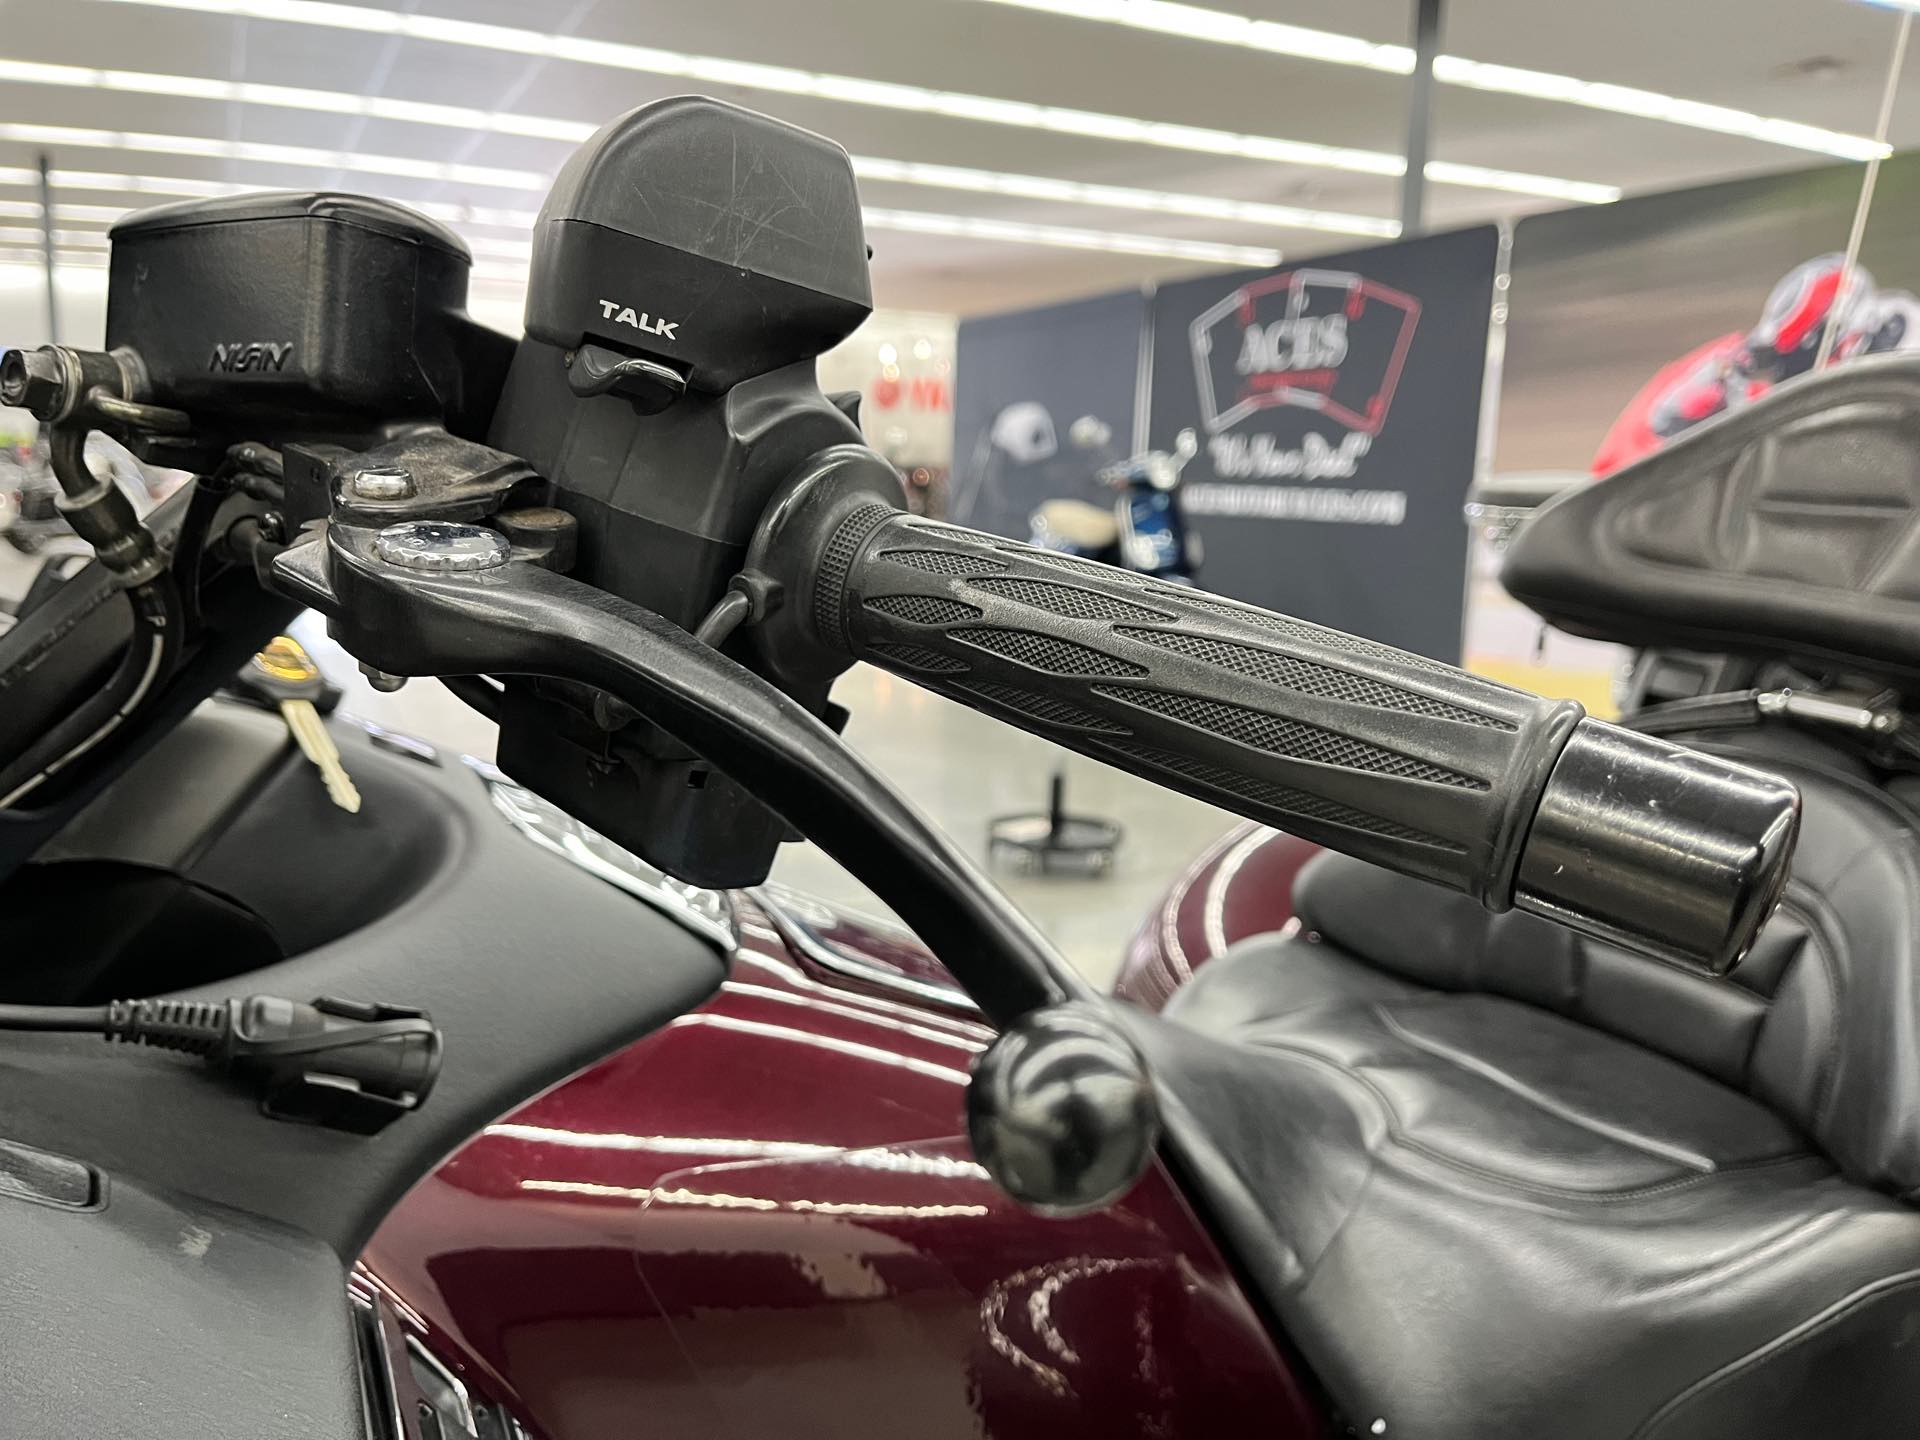 2006 Honda Gold Wing Audio / Comfort at Aces Motorcycles - Denver